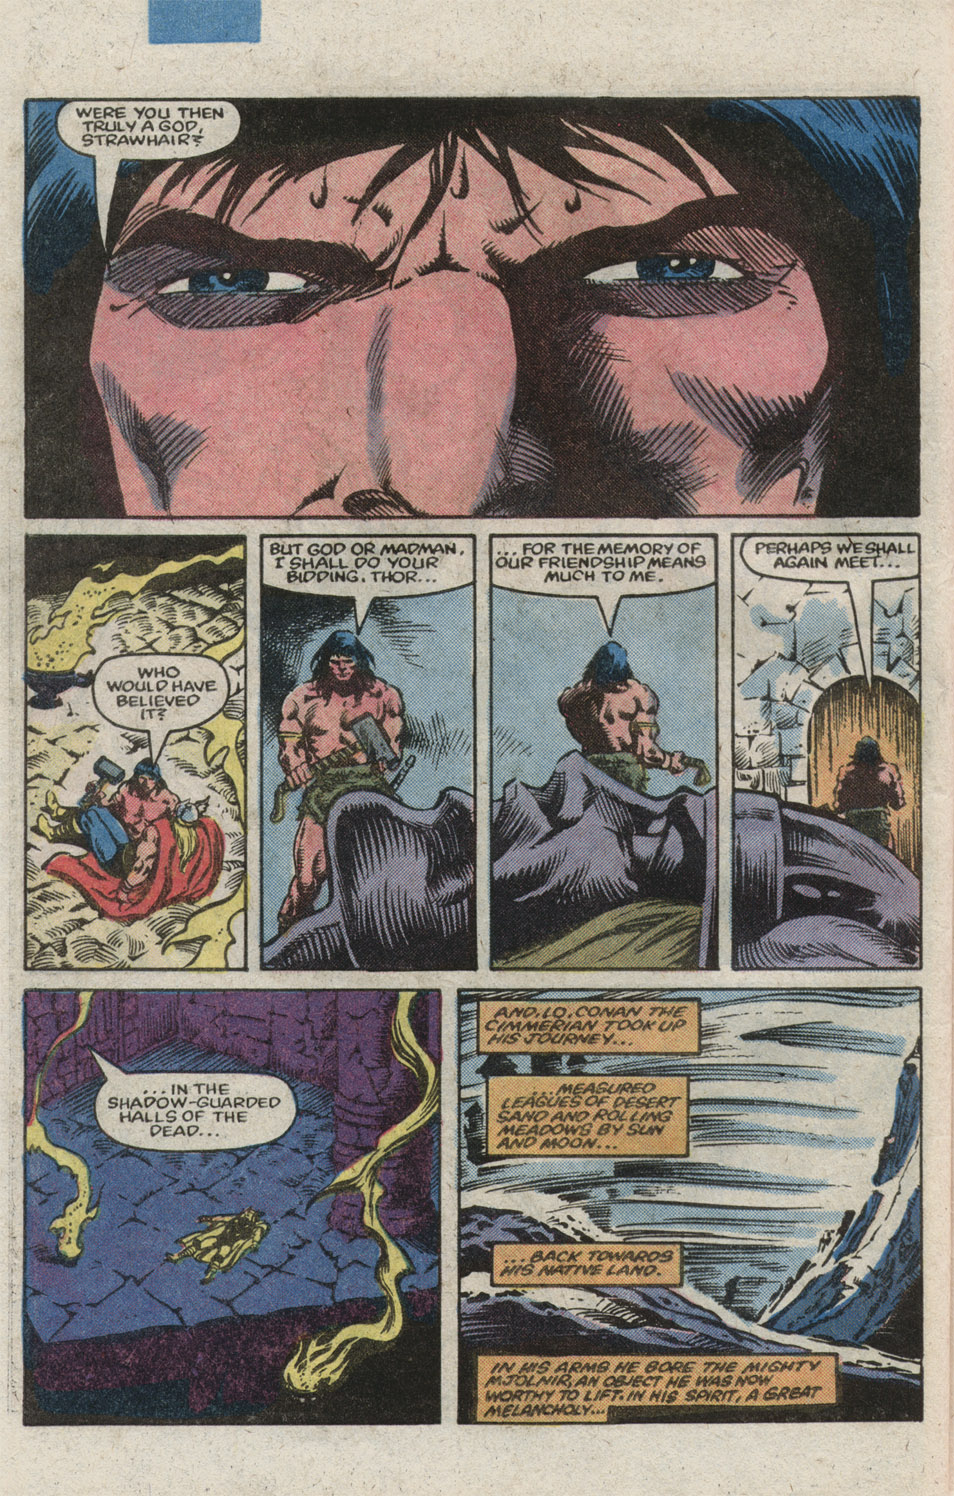 What If? (1977) issue 39 - Thor battled conan - Page 44